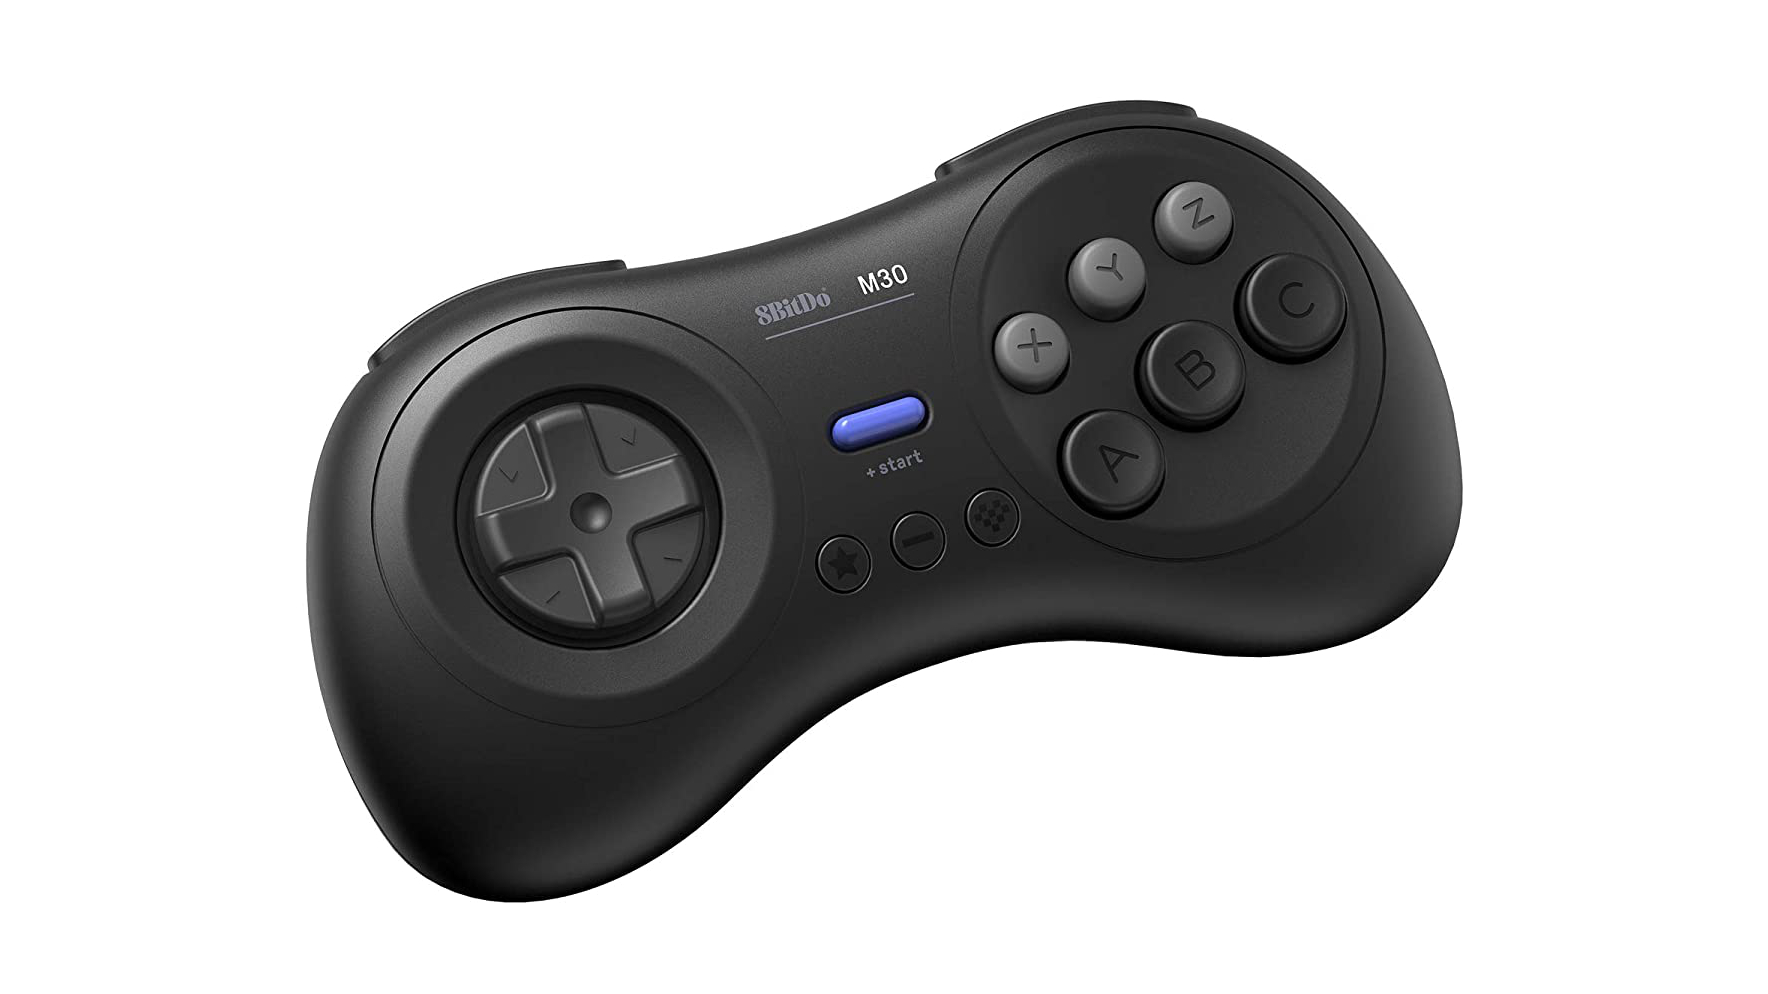 Android bluetooth controller - Die hochwertigsten Android bluetooth controller unter die Lupe genommen!